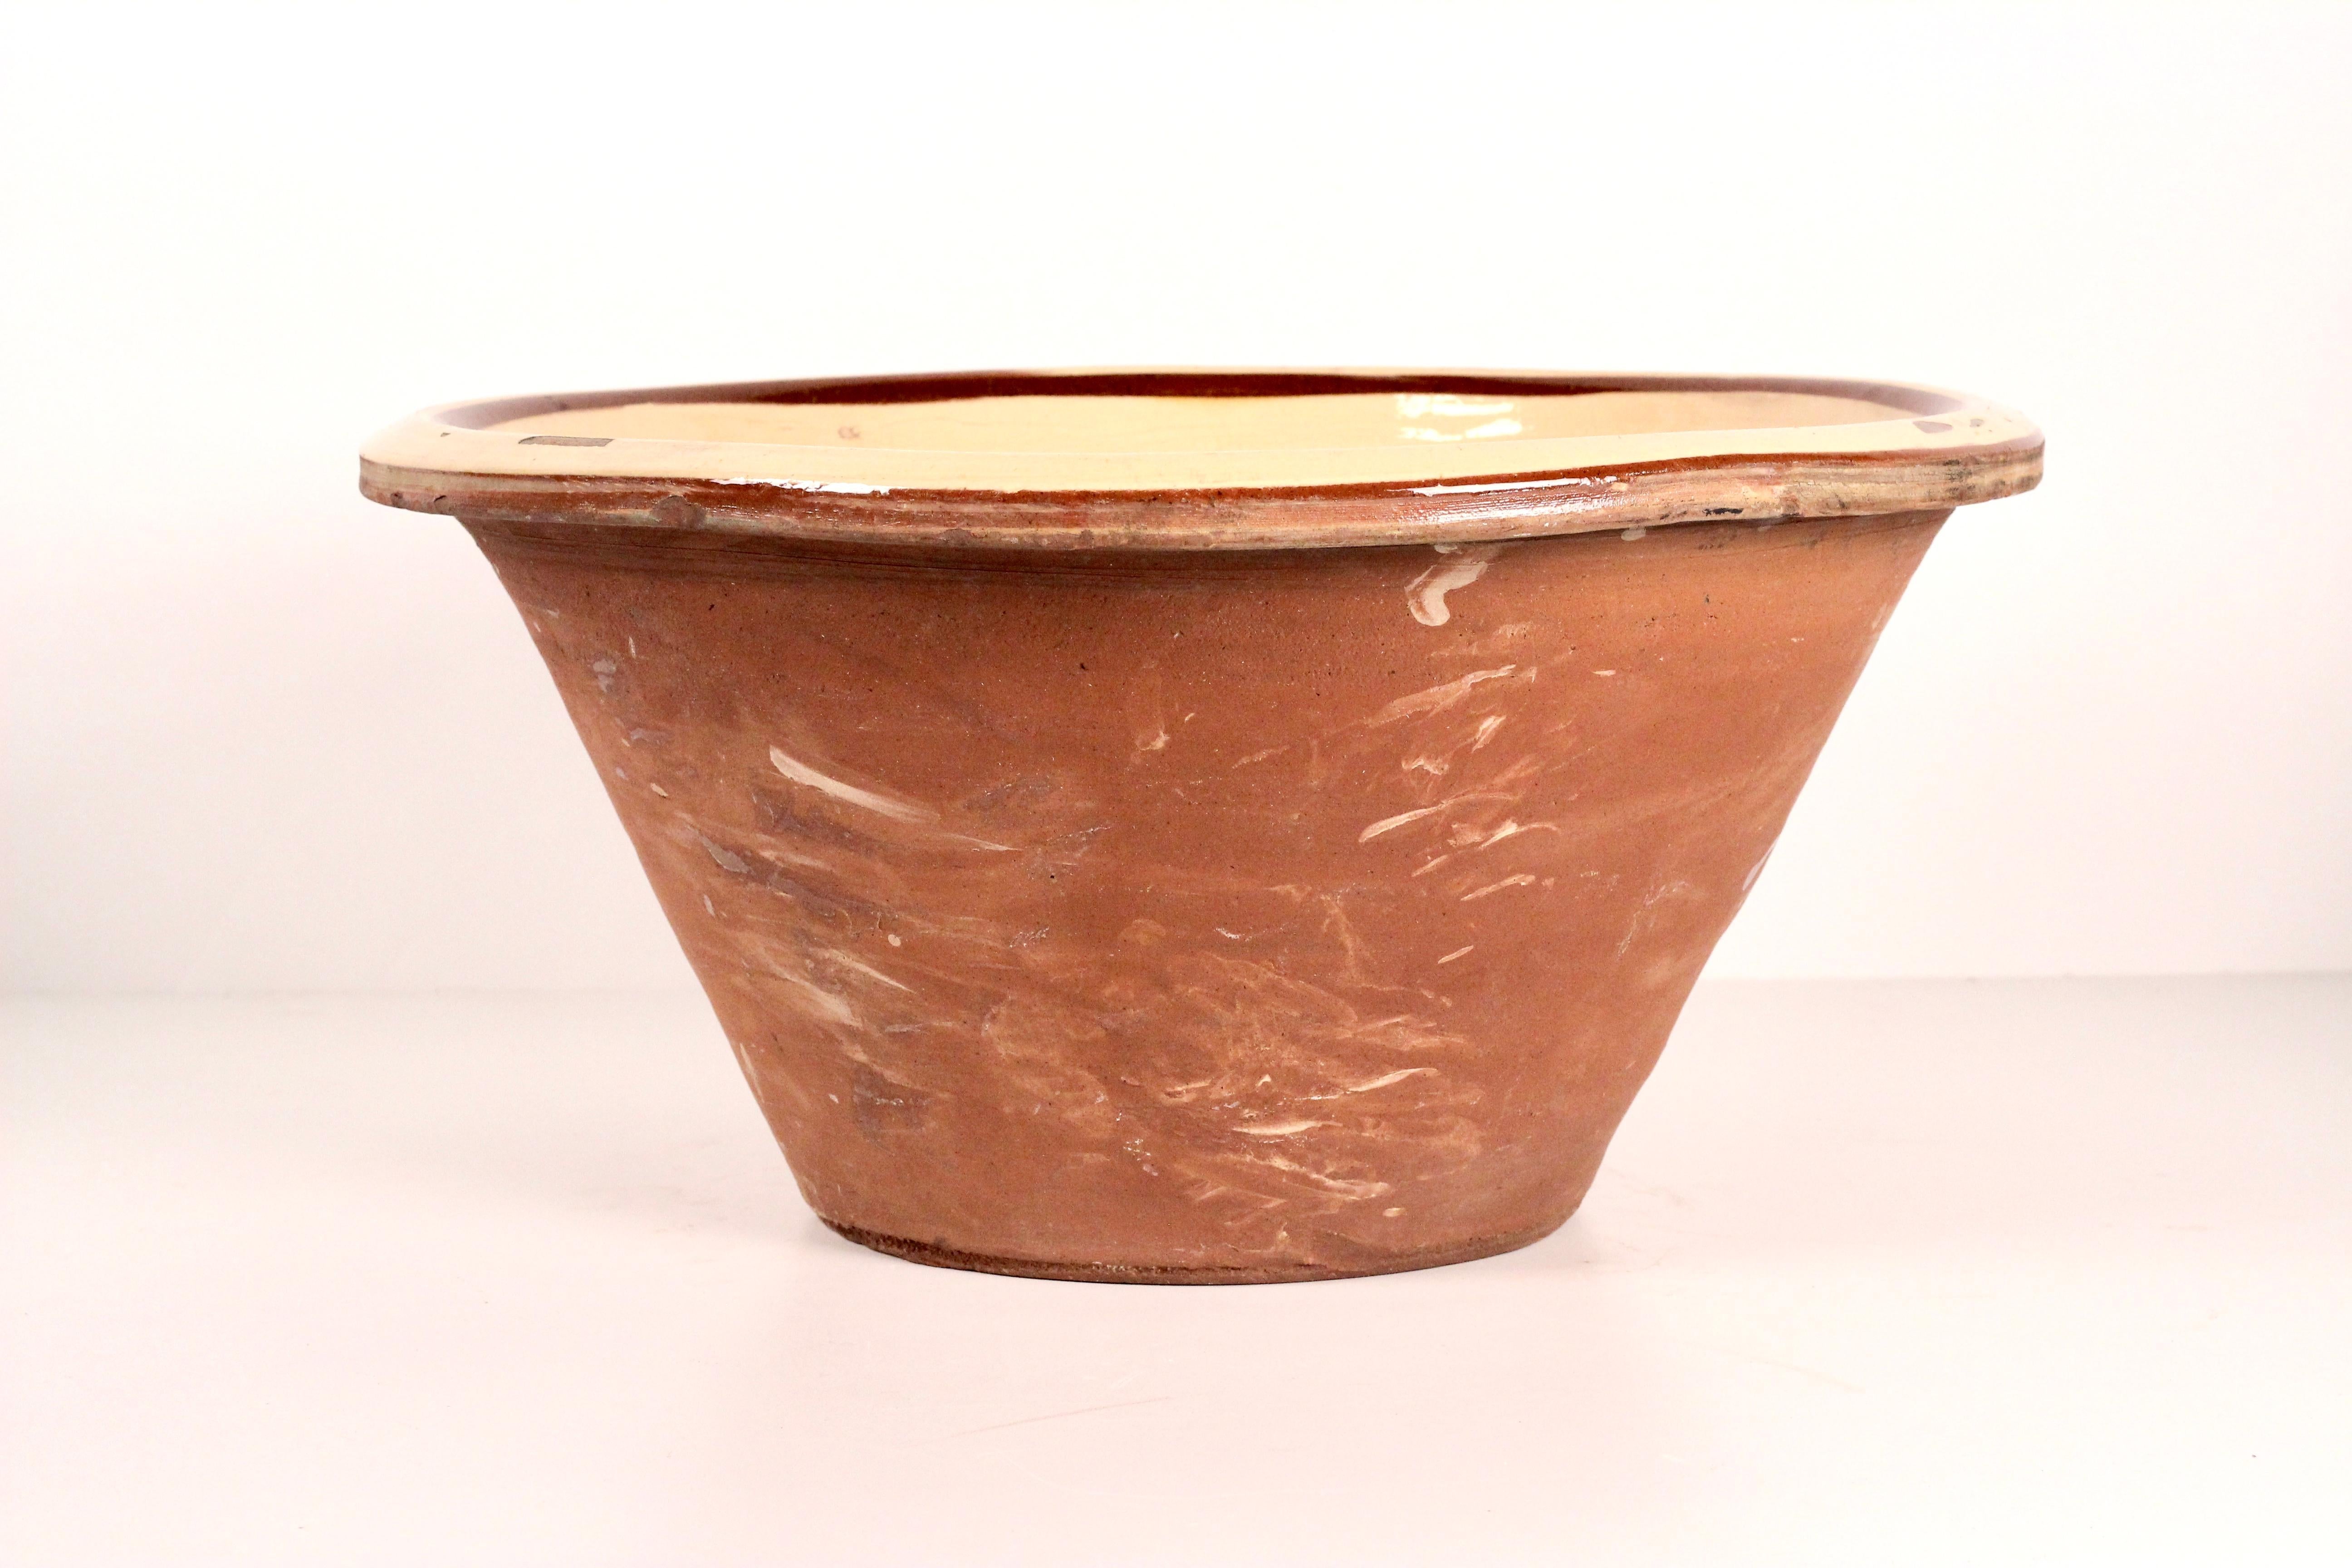 This wonderful over sized 19th Century Dairy Bowl was found in the darkest depths of The historic Cotswolds in England. A Hand made Dairy Bowl that we procured from a traditional cheese maker. It contains much character, showing years of patina and